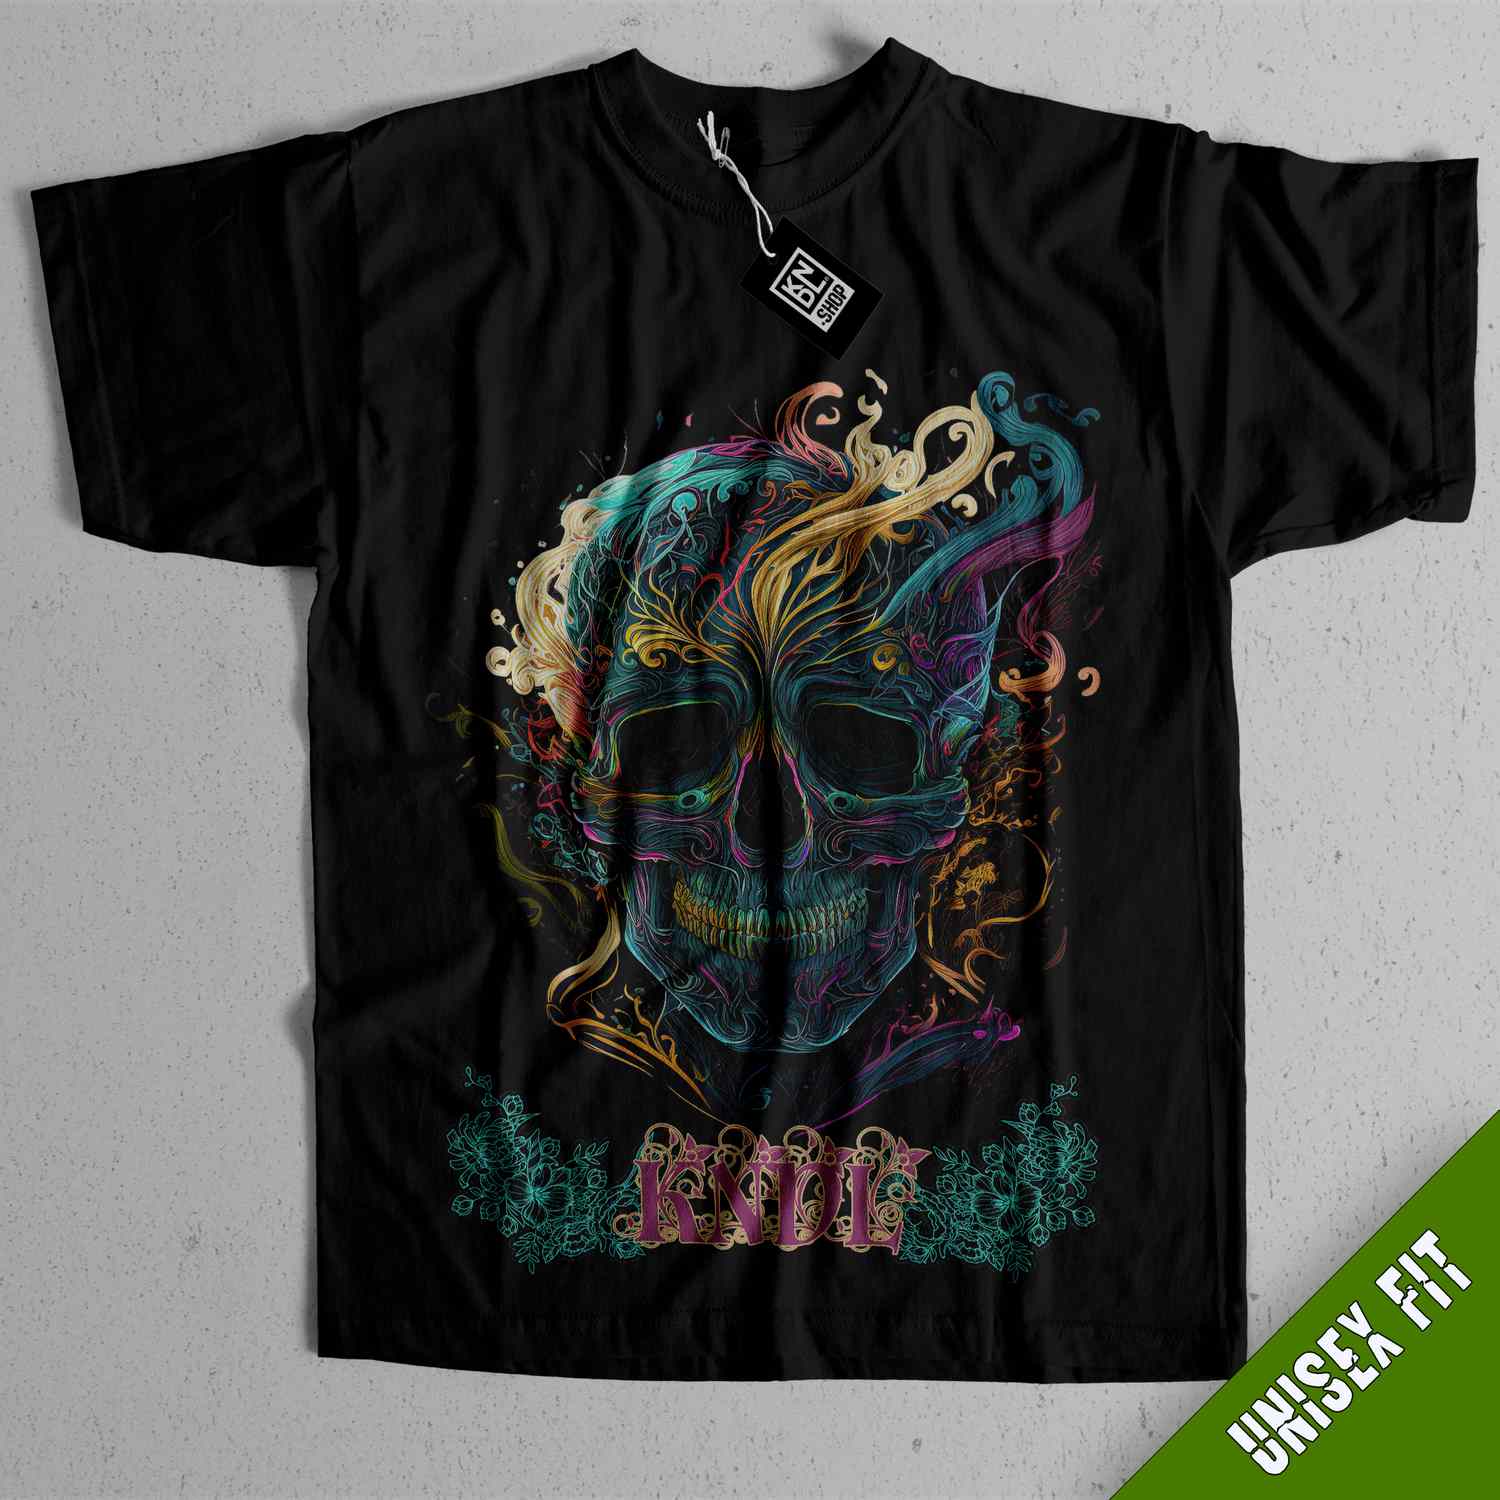 a black t - shirt with a colorful skull on it